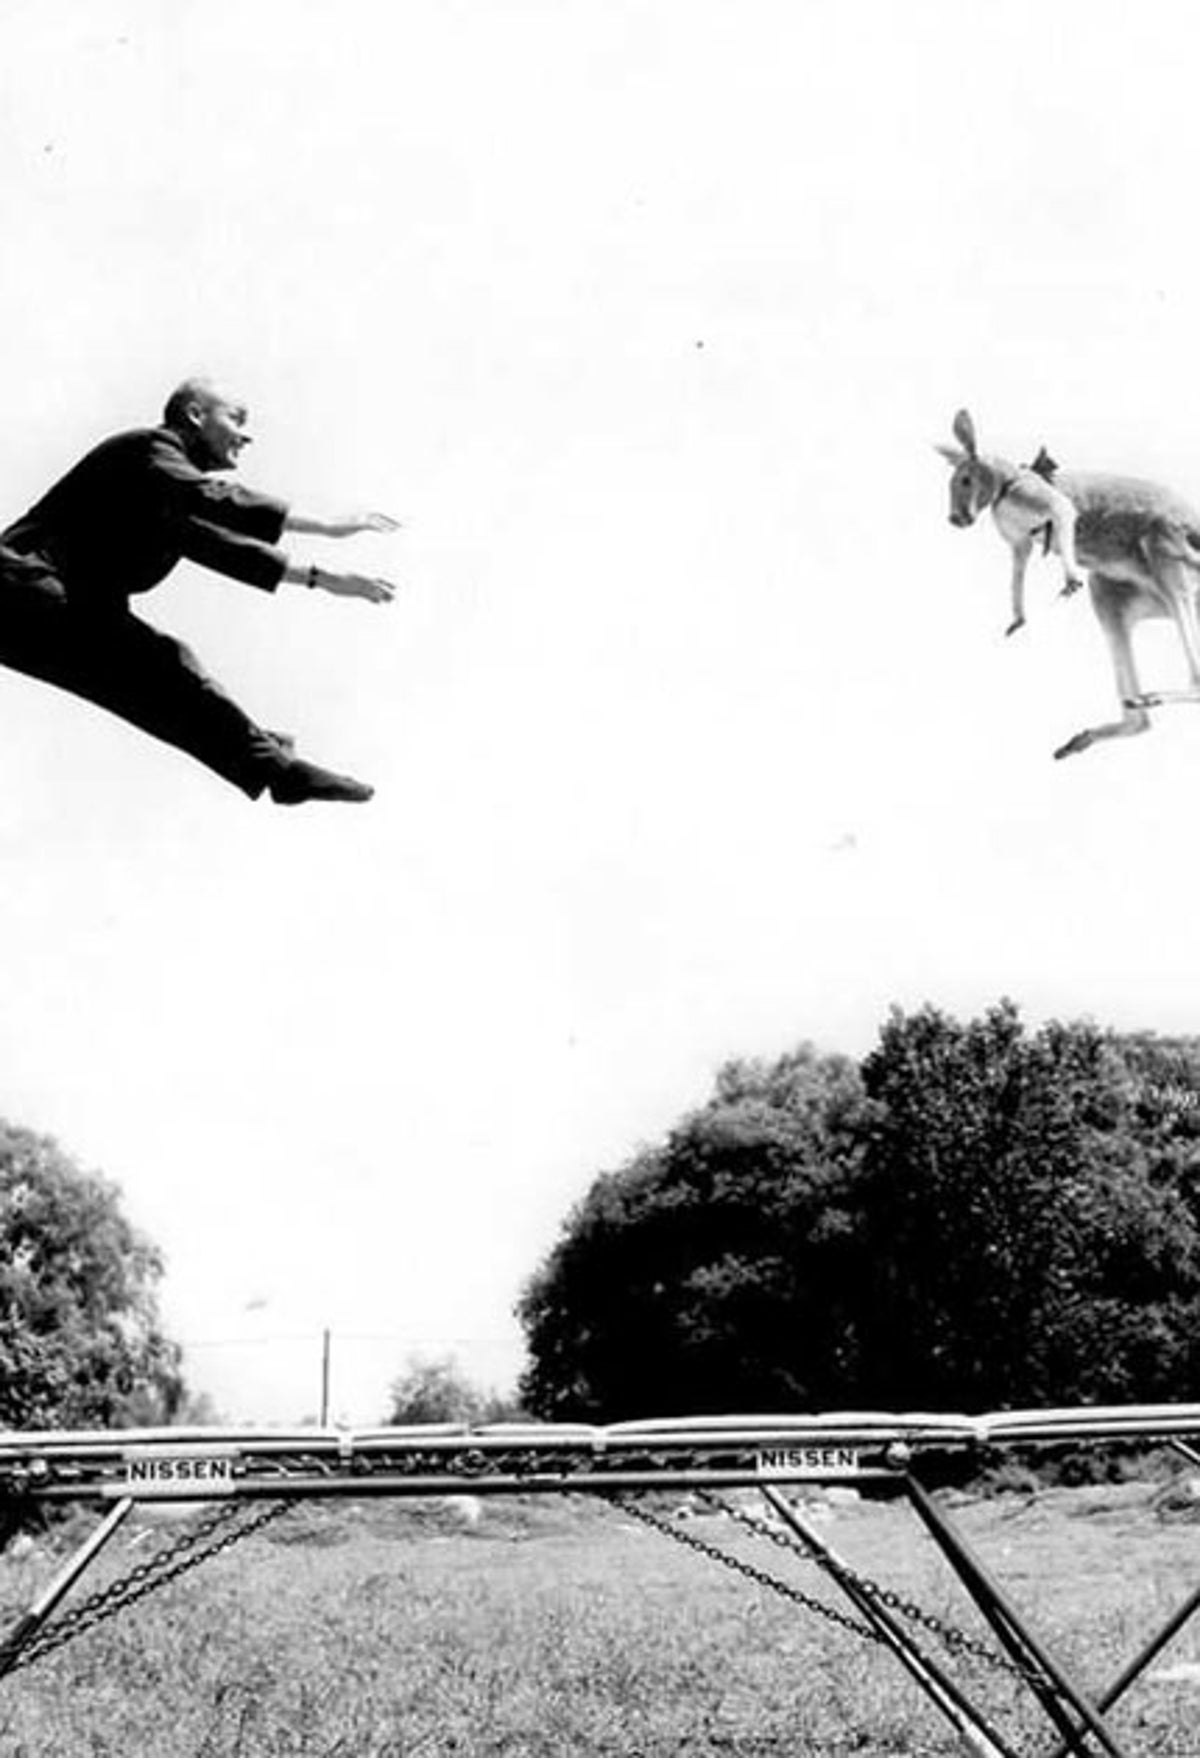 Nissen: Inventor of the trampoline | The Independent | The